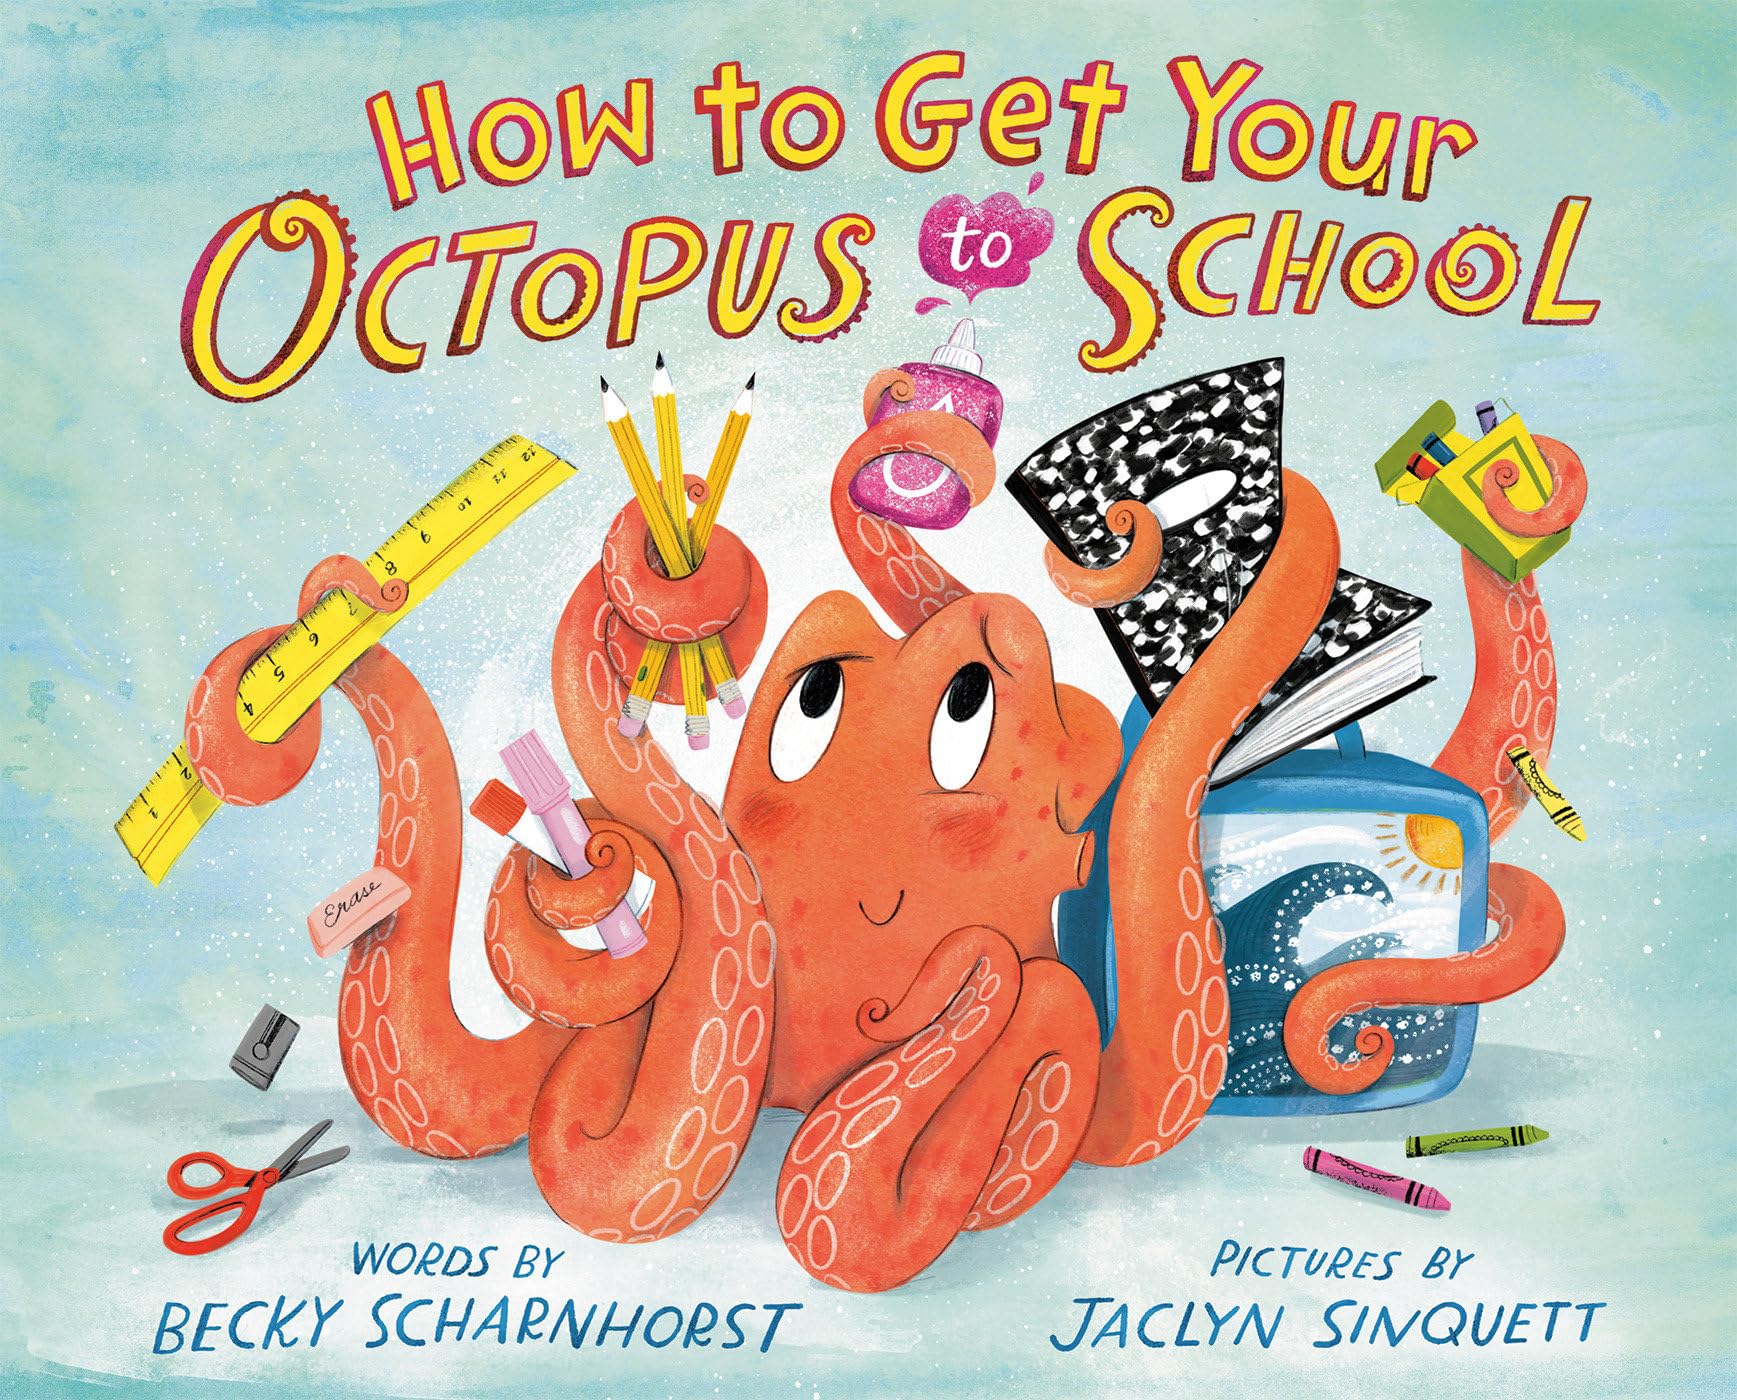 title and author and illustration of an octopus holding school supplies